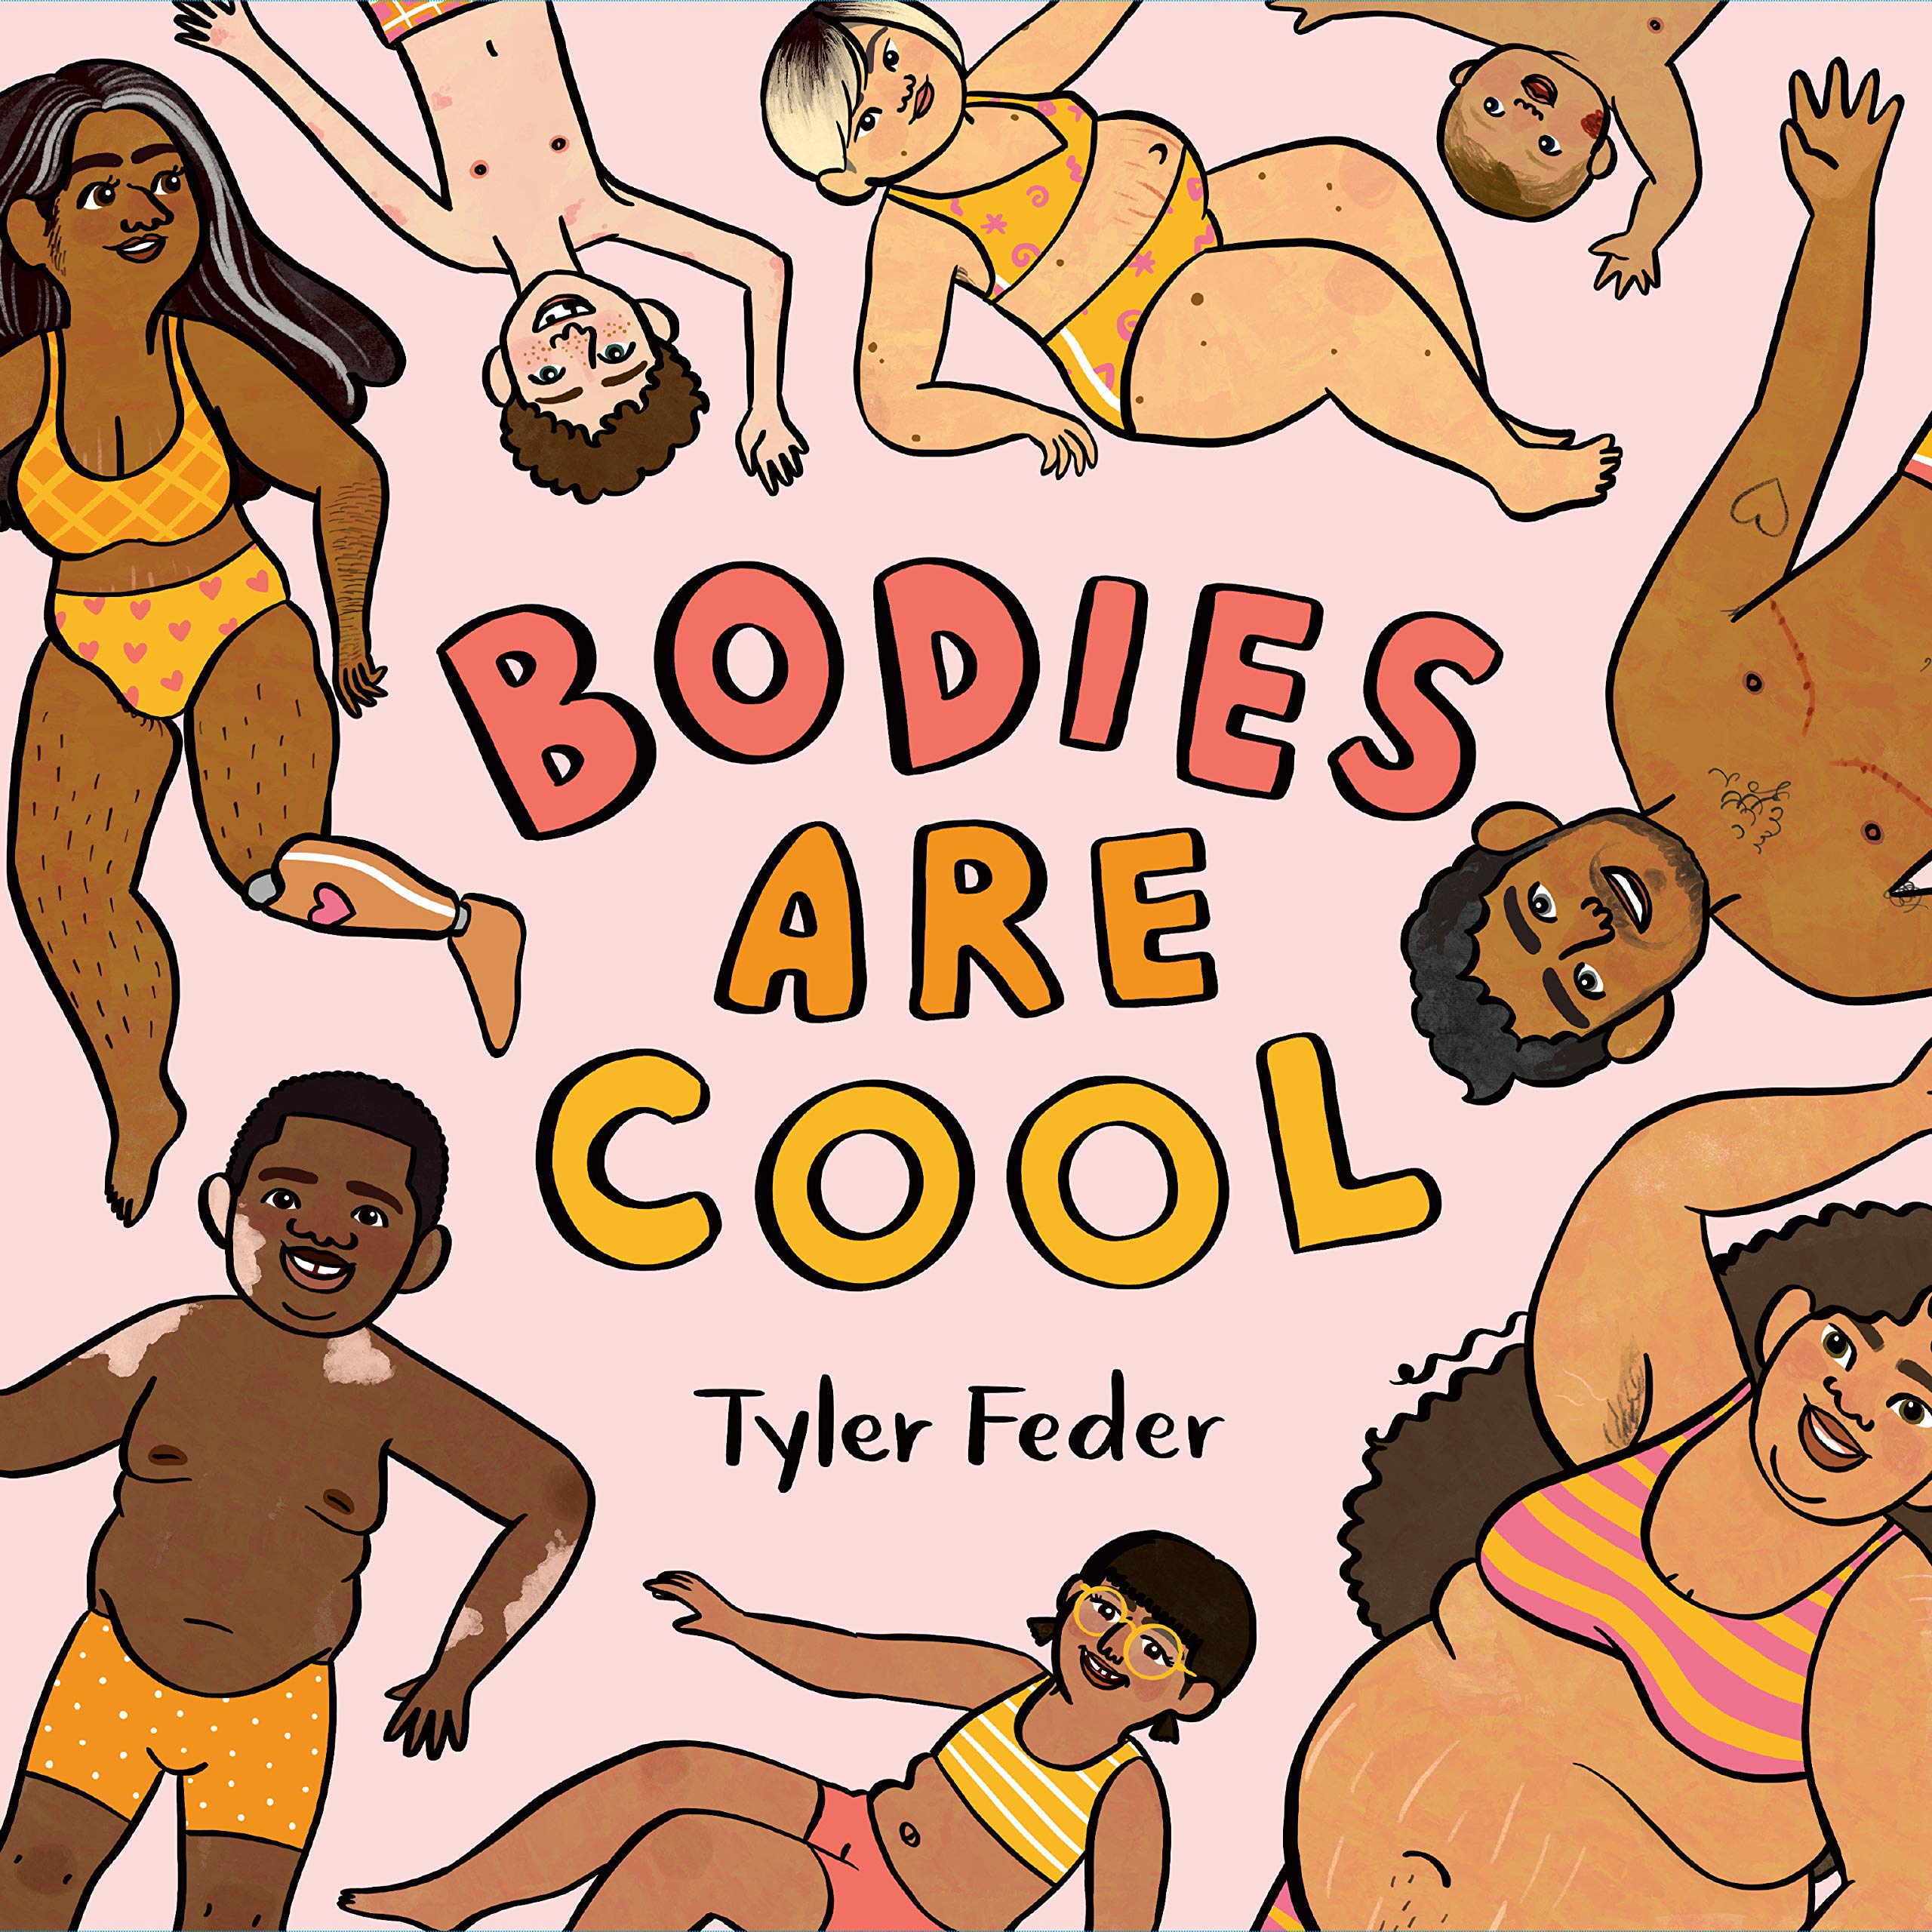 Bodies Are Cool book cover - illustration of various folks with diverse body types floating around against a pale pink background, with pink, orange, and yellow text for the title